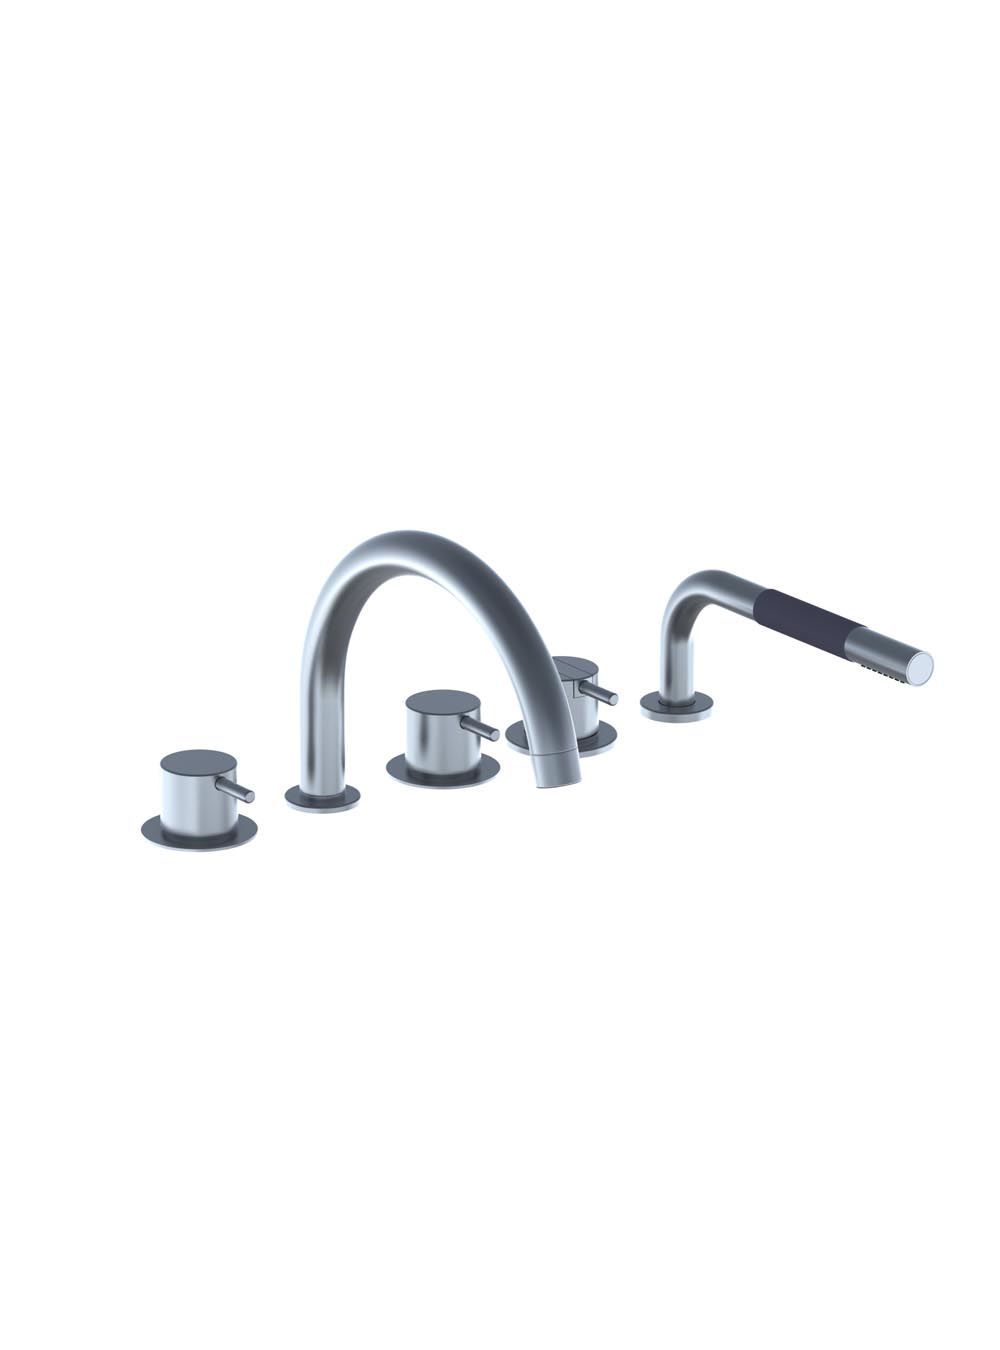 SC13: Two-handle mixer S50DH + S50D with swivel spout 090E, one-handle mixer with hand shower 500T1.